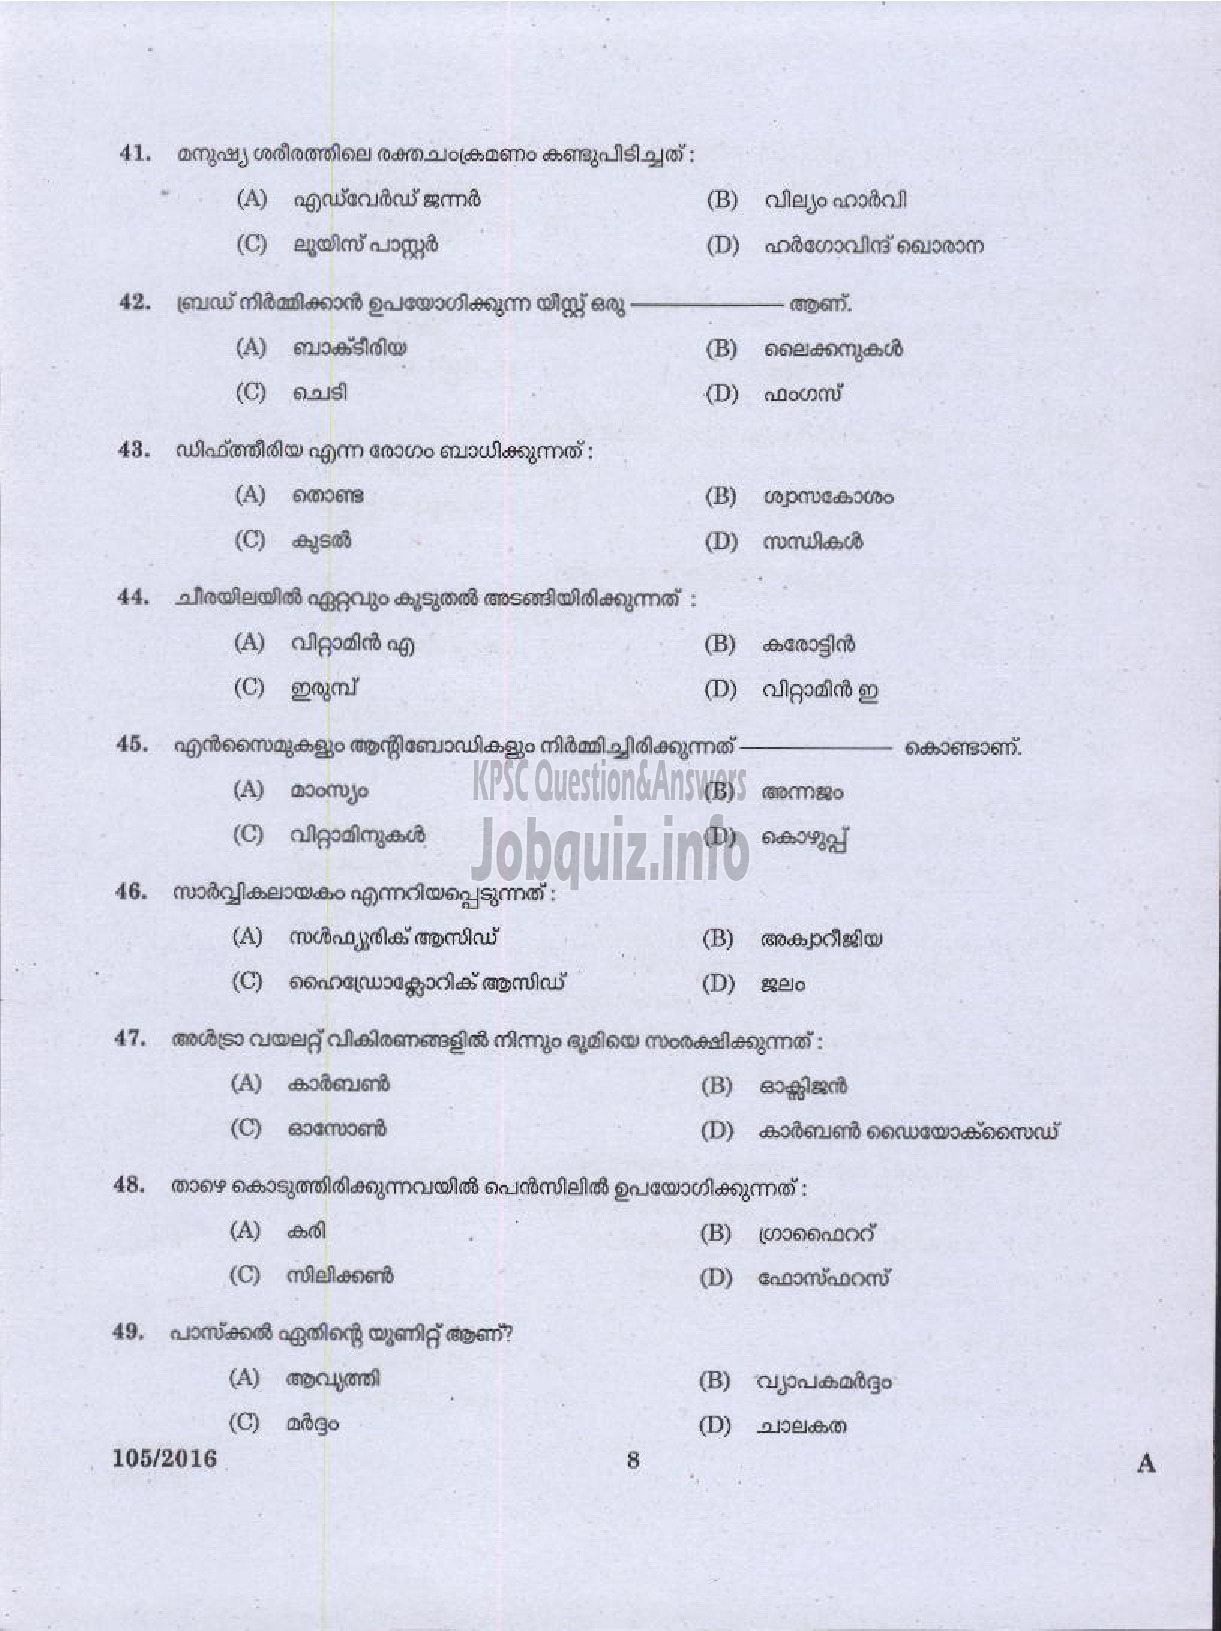 Kerala PSC Question Paper - LOWER DIVISION CLERK KANNADA AND MALAYALAM KNOWING VARIOUS-6